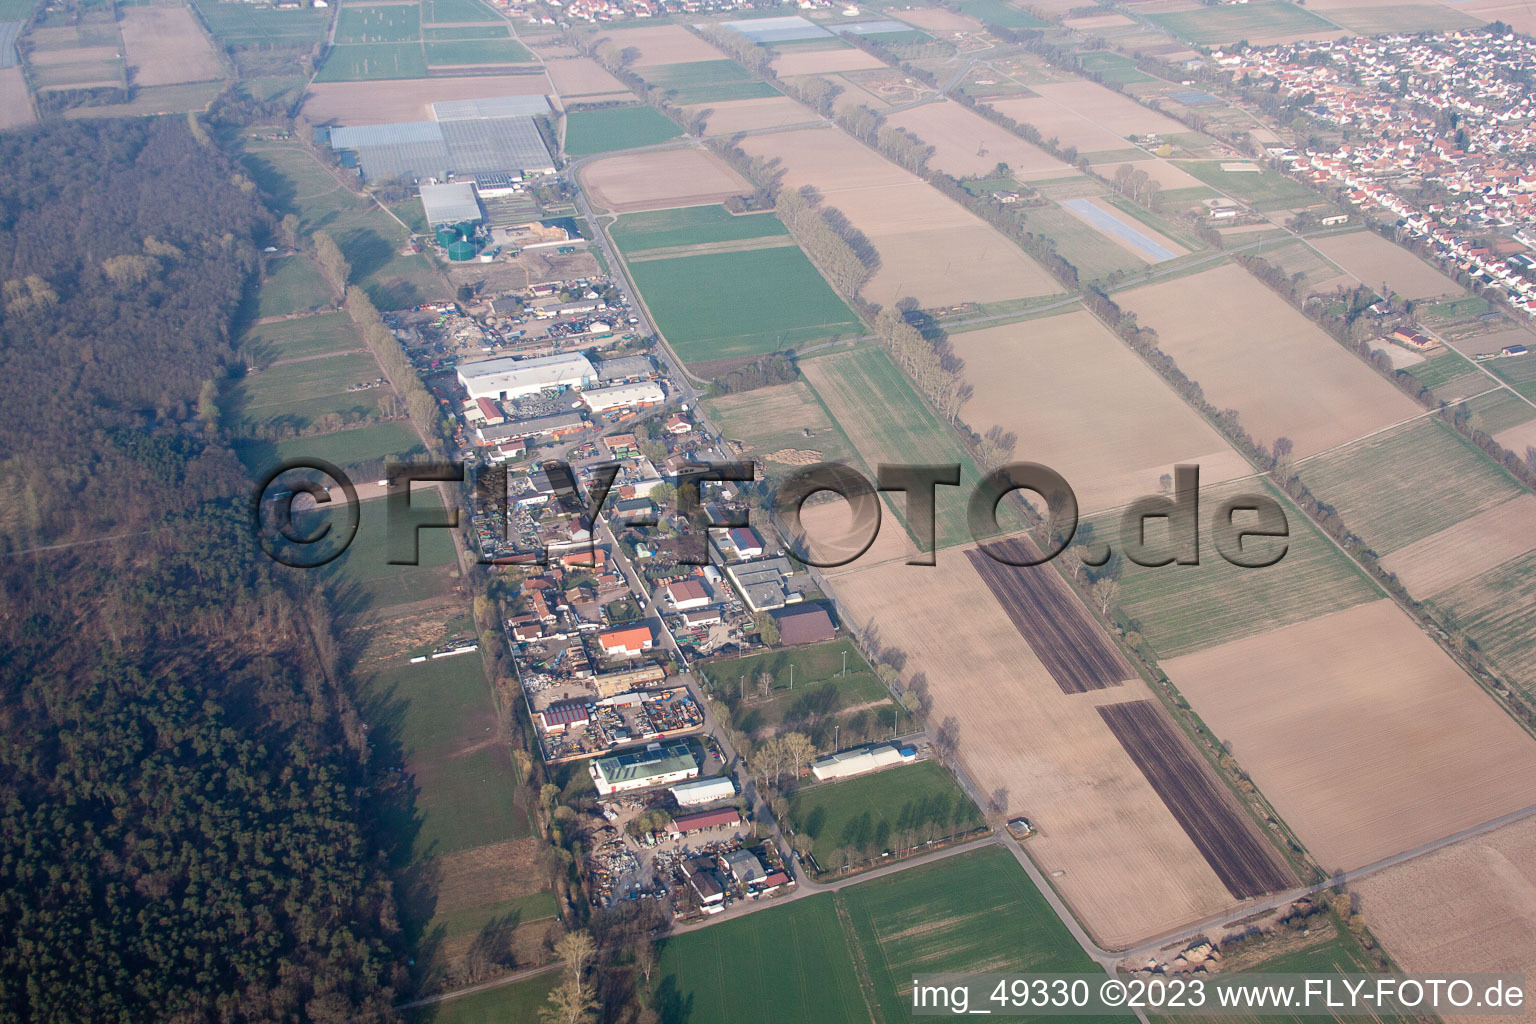 Bird's eye view of Lustadt in the state Rhineland-Palatinate, Germany